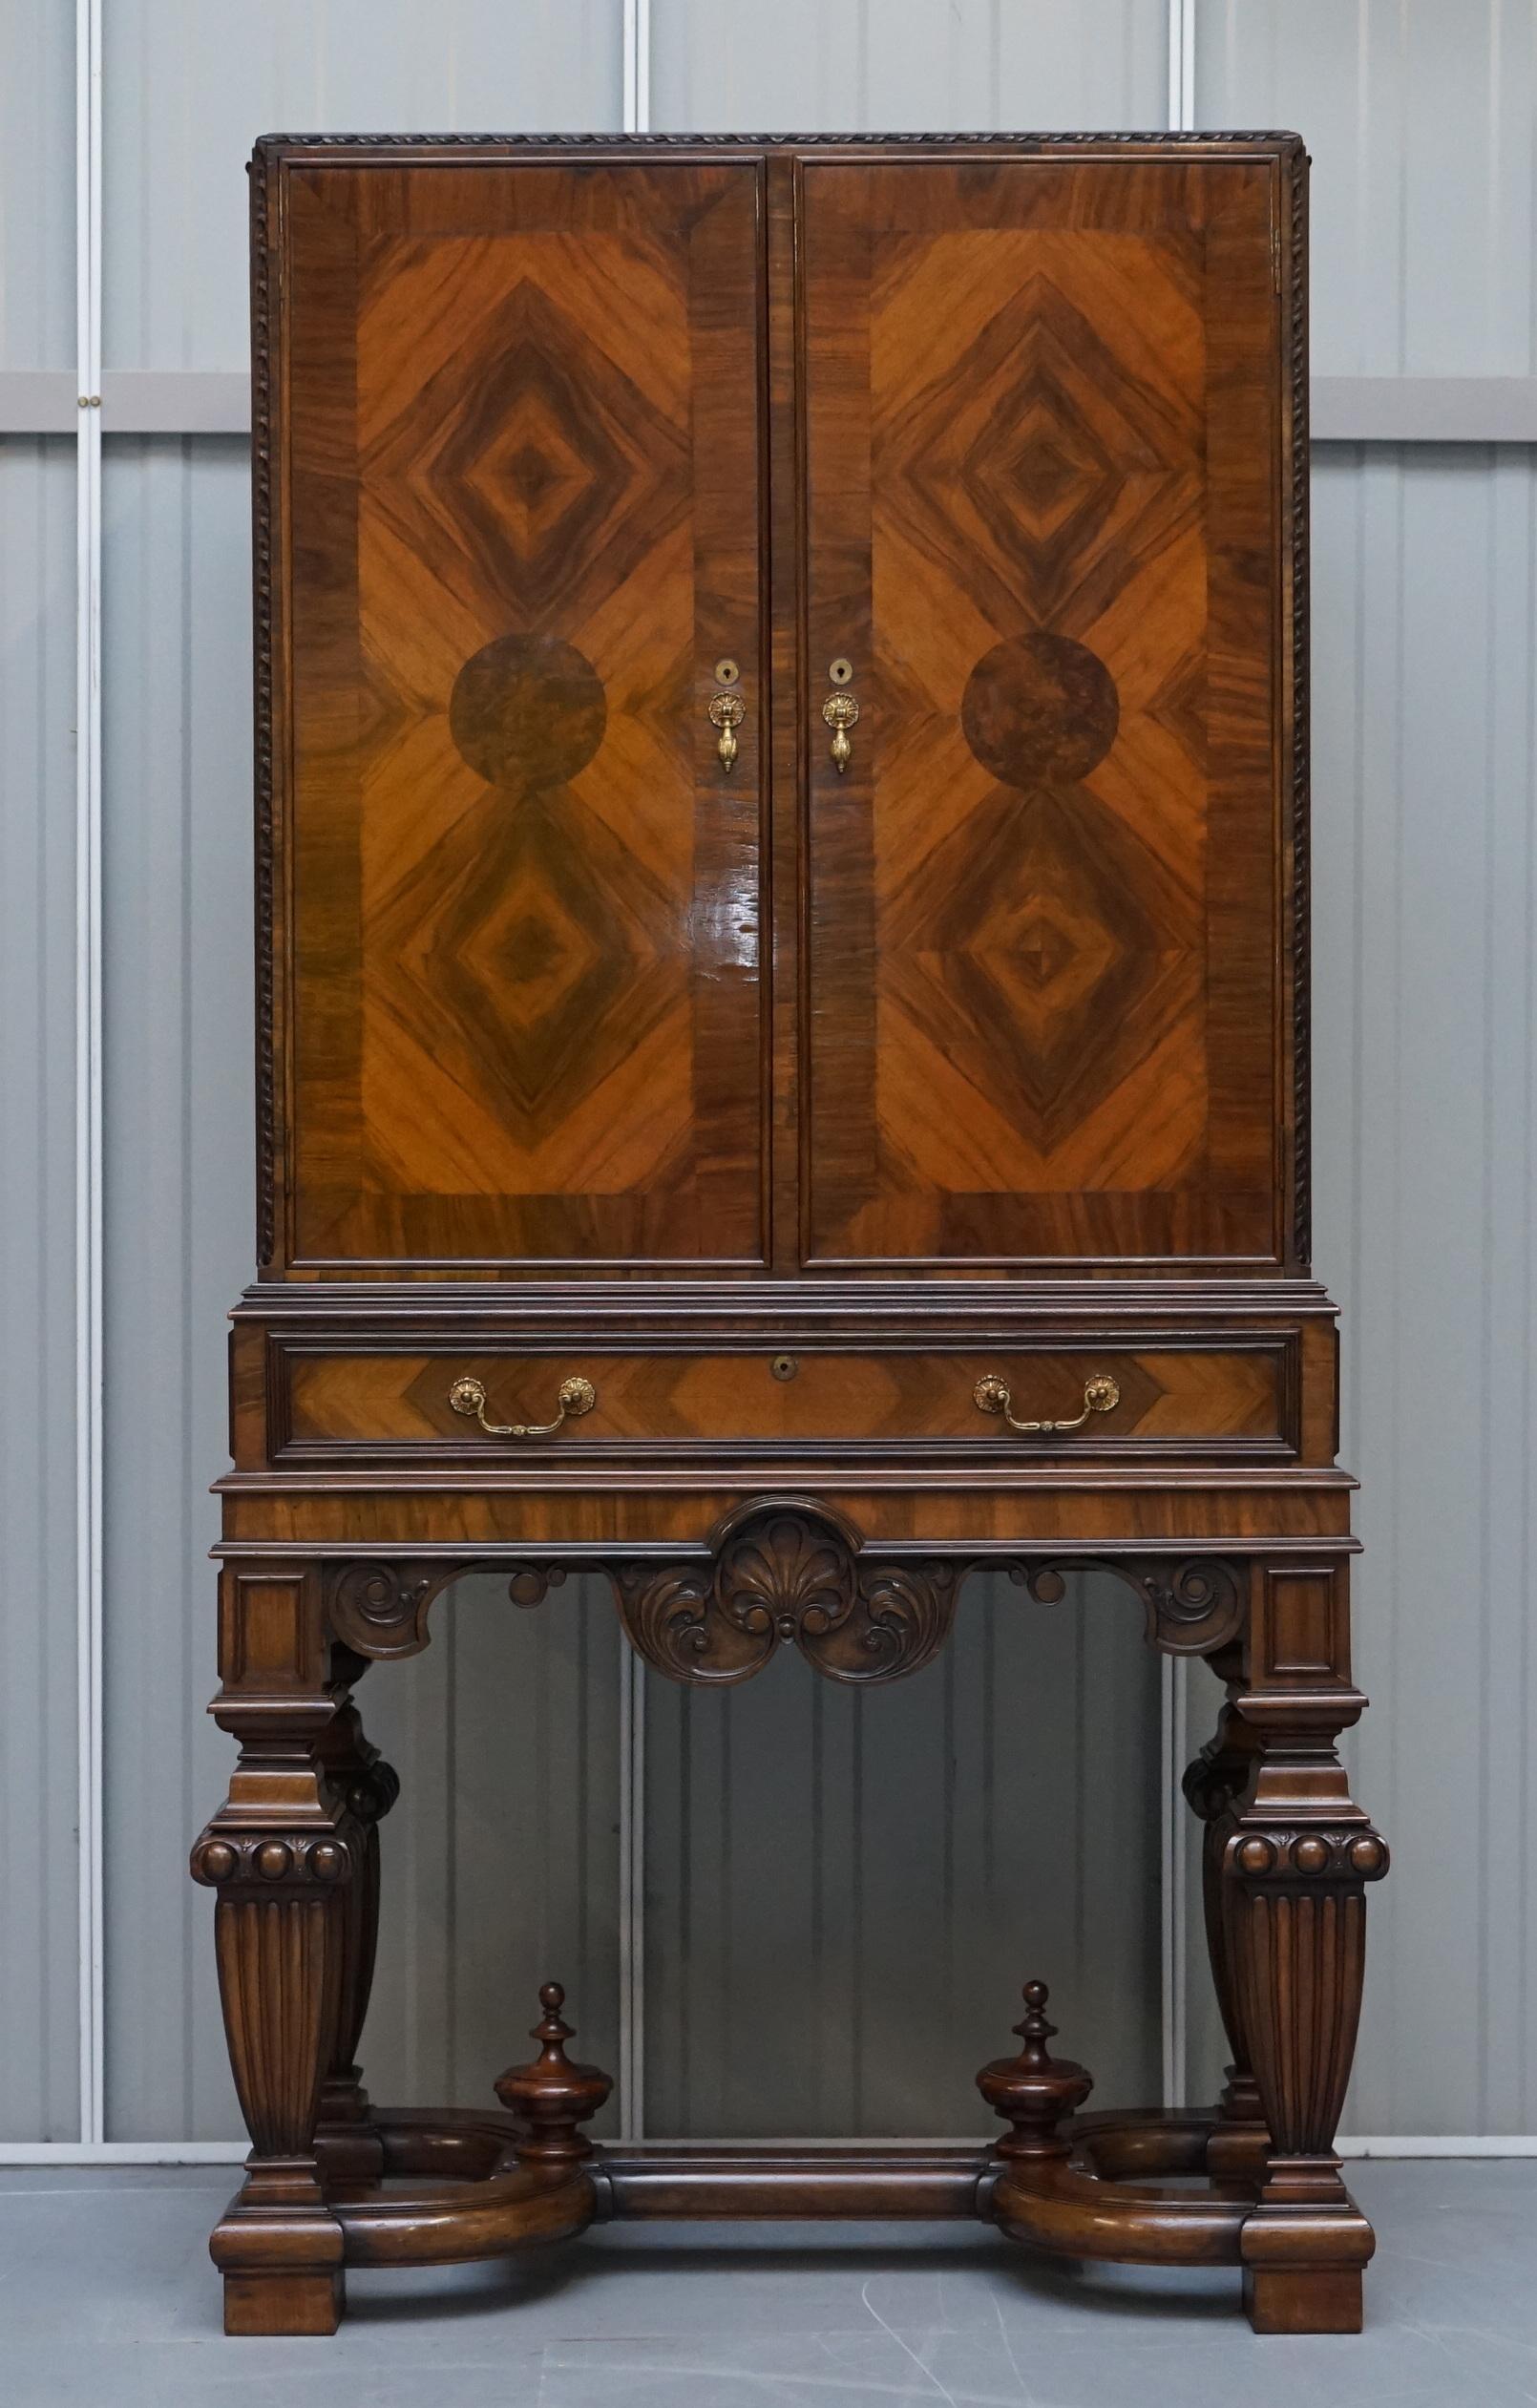 We are delighted to offer for sale this very fine original Victorian Liberty’s of London stamped burr walnut inlaid drinks cabinet with exceptional exhibition base

This is one of best drinks cabinets I have ever seen, the quality of the materials